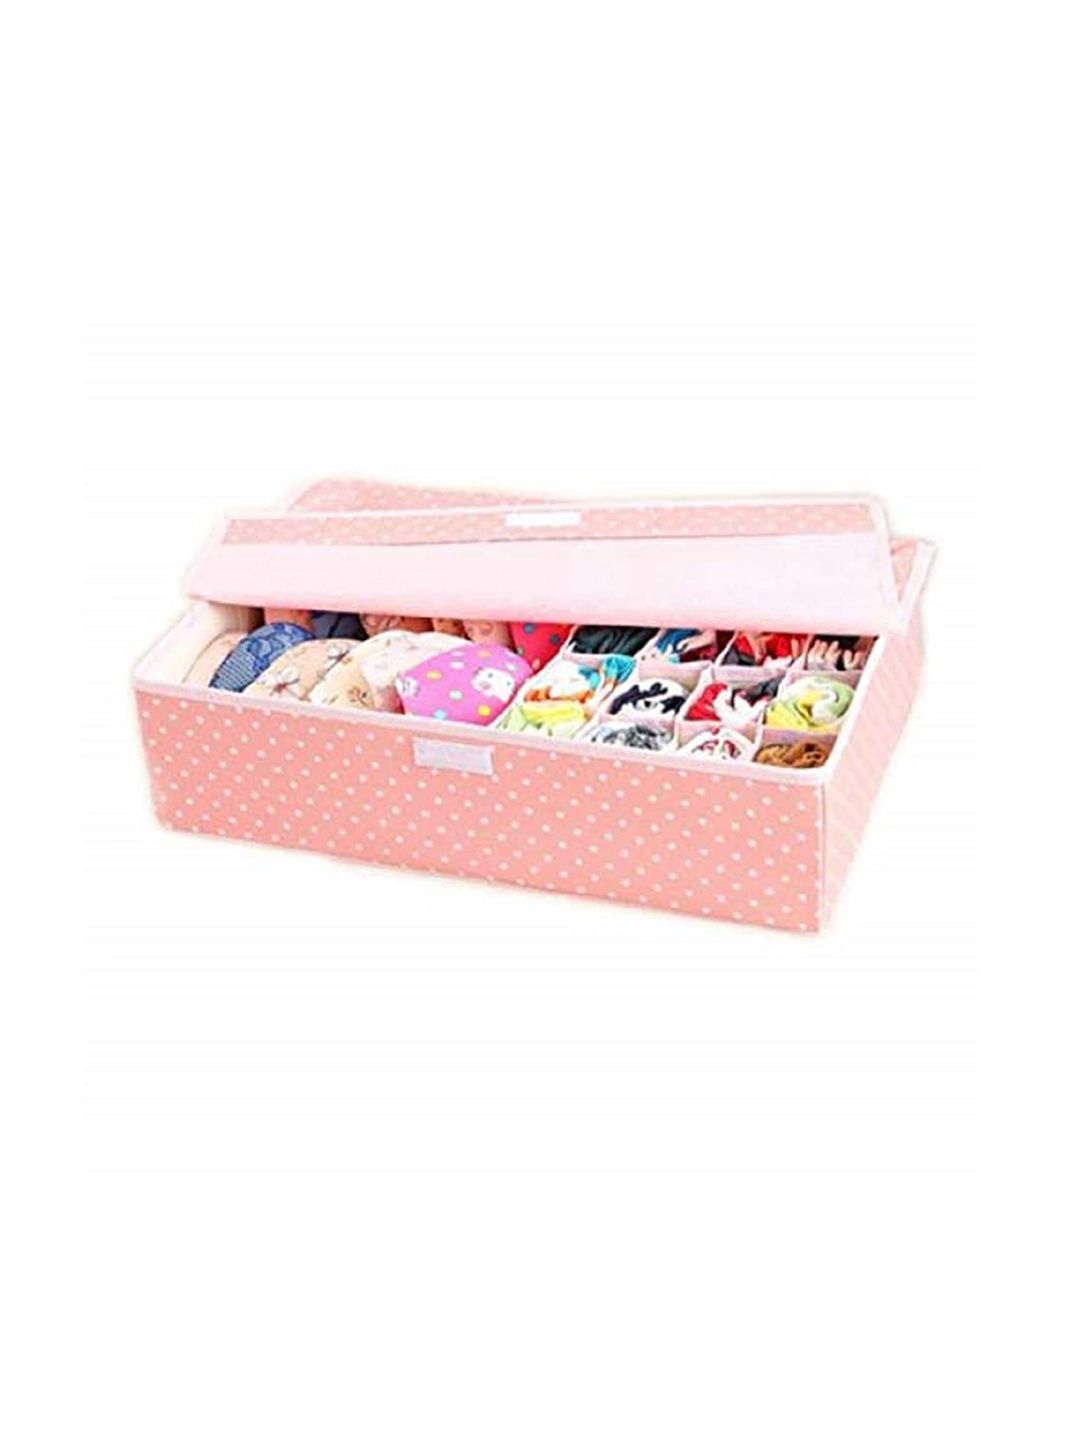 HOUSE OF QUIRK Printed 16 Compartment Drawer Organiser Price in India